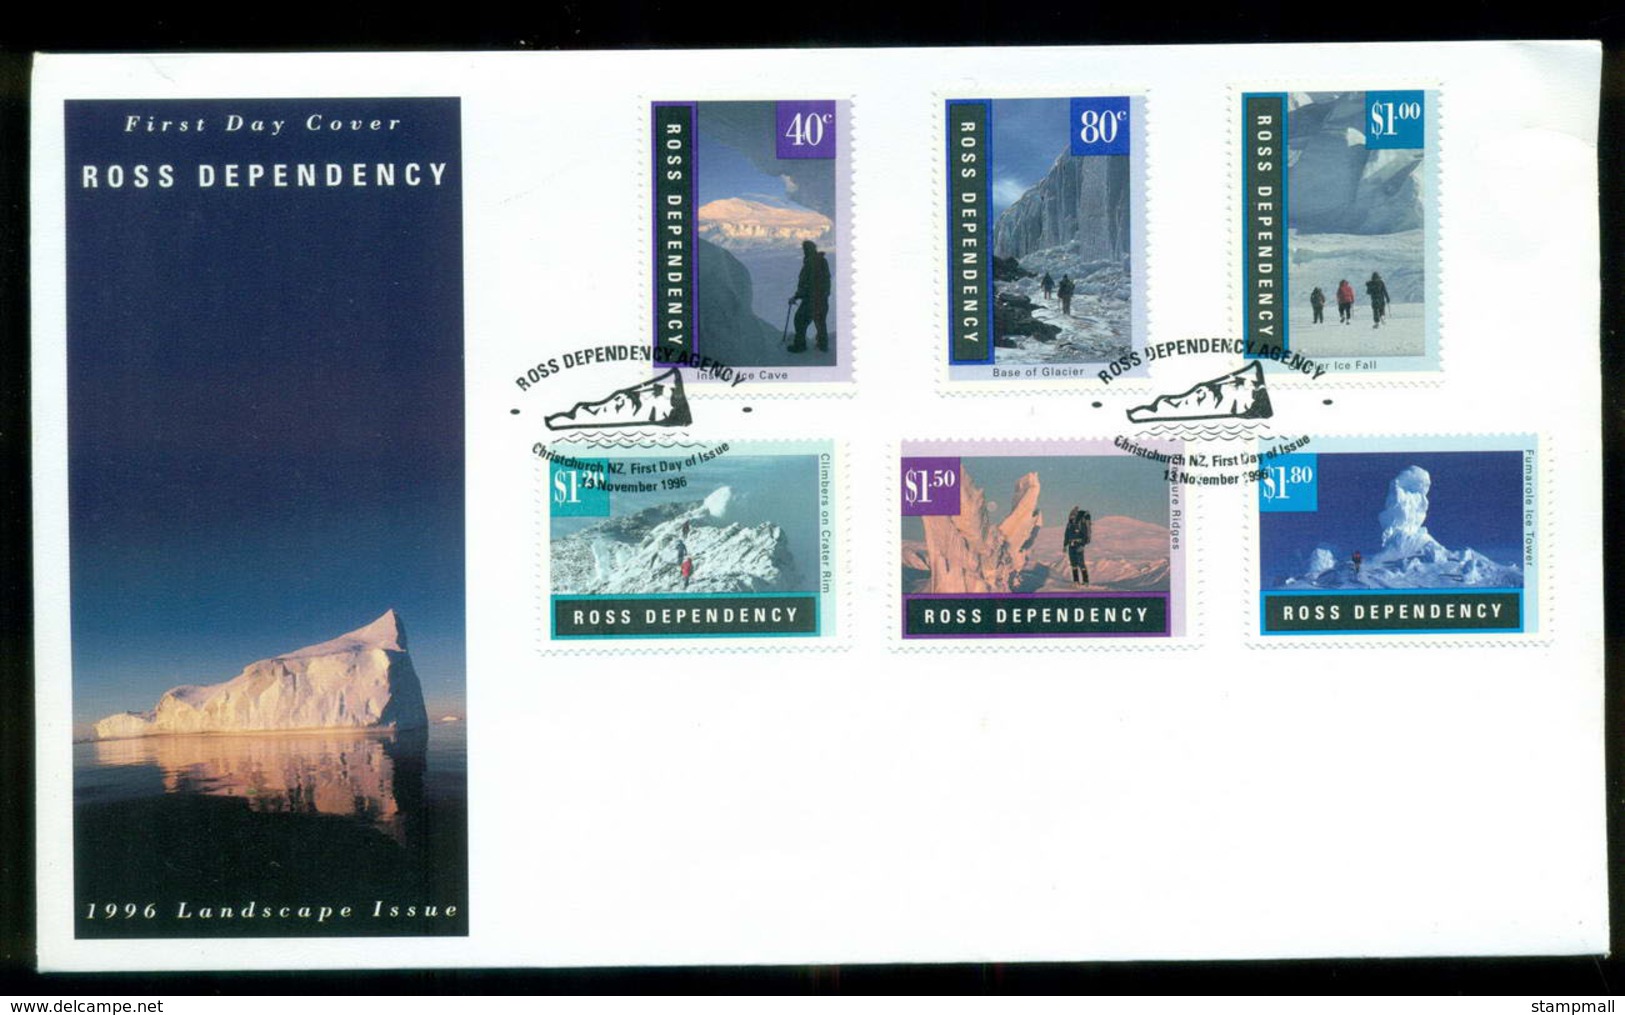 Ross Dependency 1996 Antarctic Landscapes FDC Lot52888 - Unused Stamps